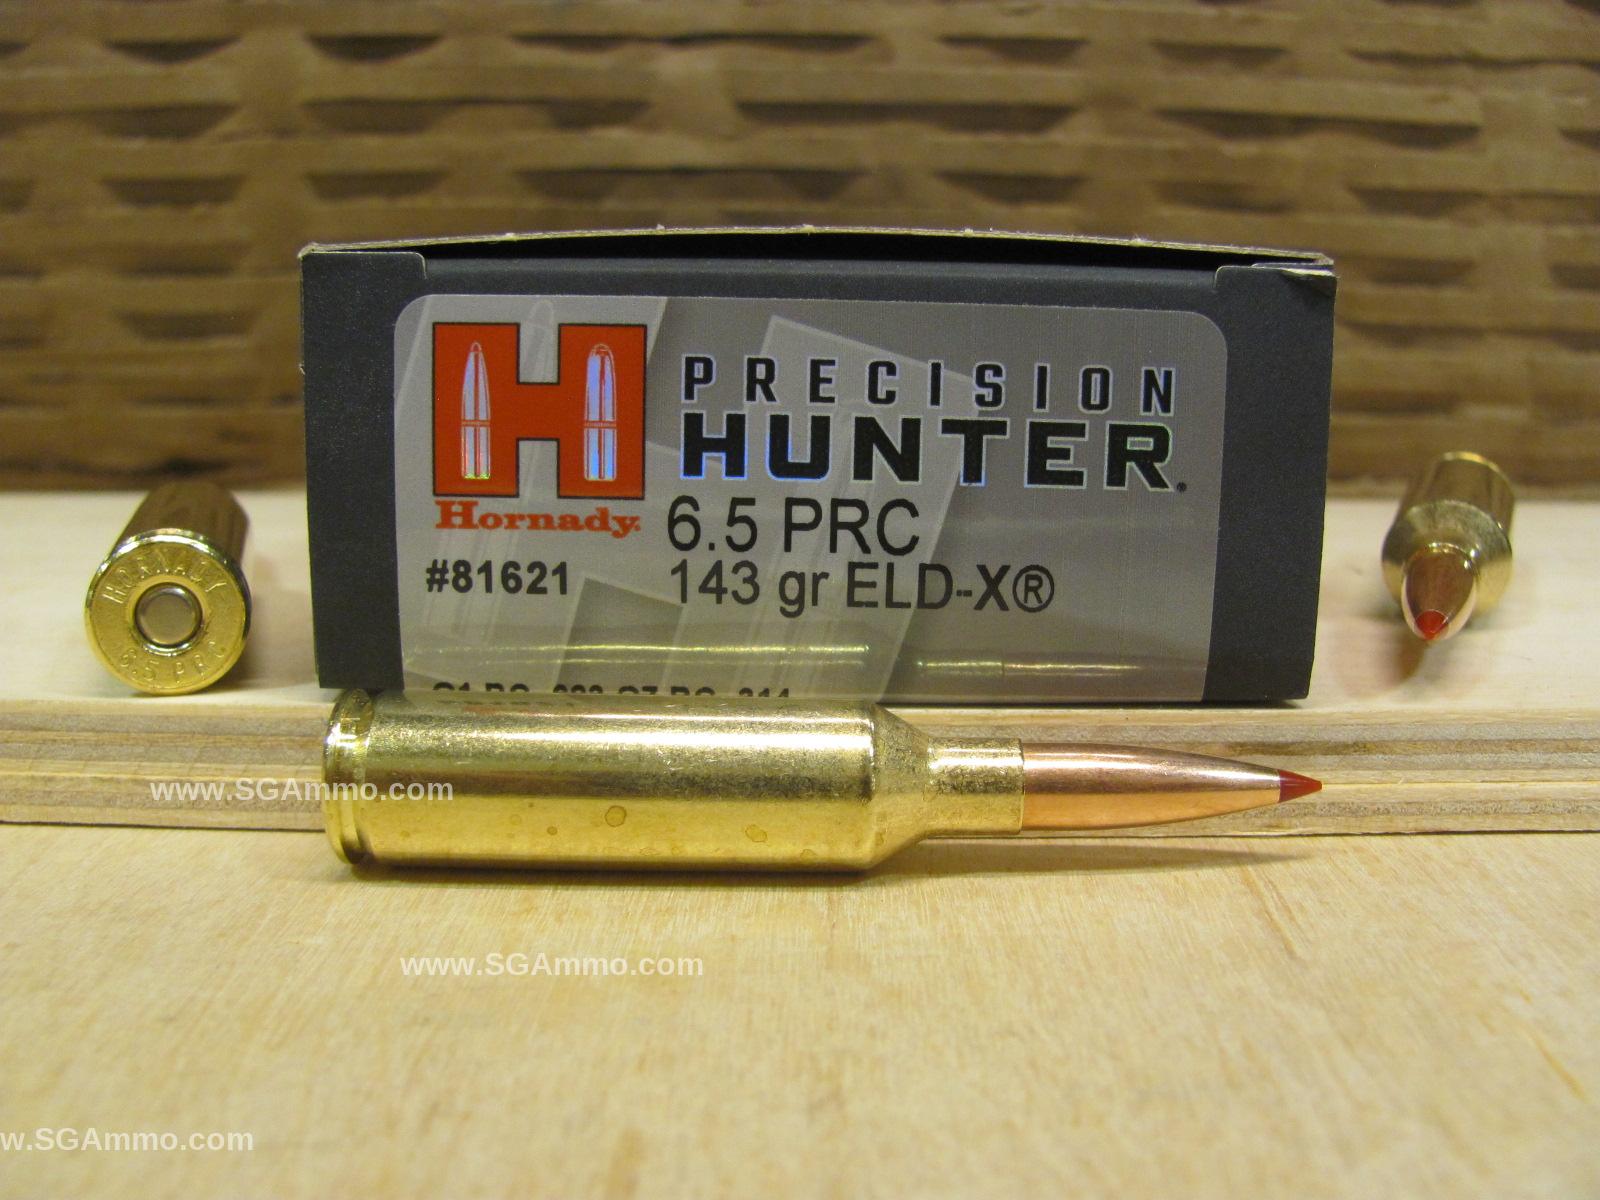 80 Round Plastic Can - 6.5 PRC 143 Grain ELD-X Hornady Precision Hunter Ammo - 81621 - Packed in Plastic Ammo Canister